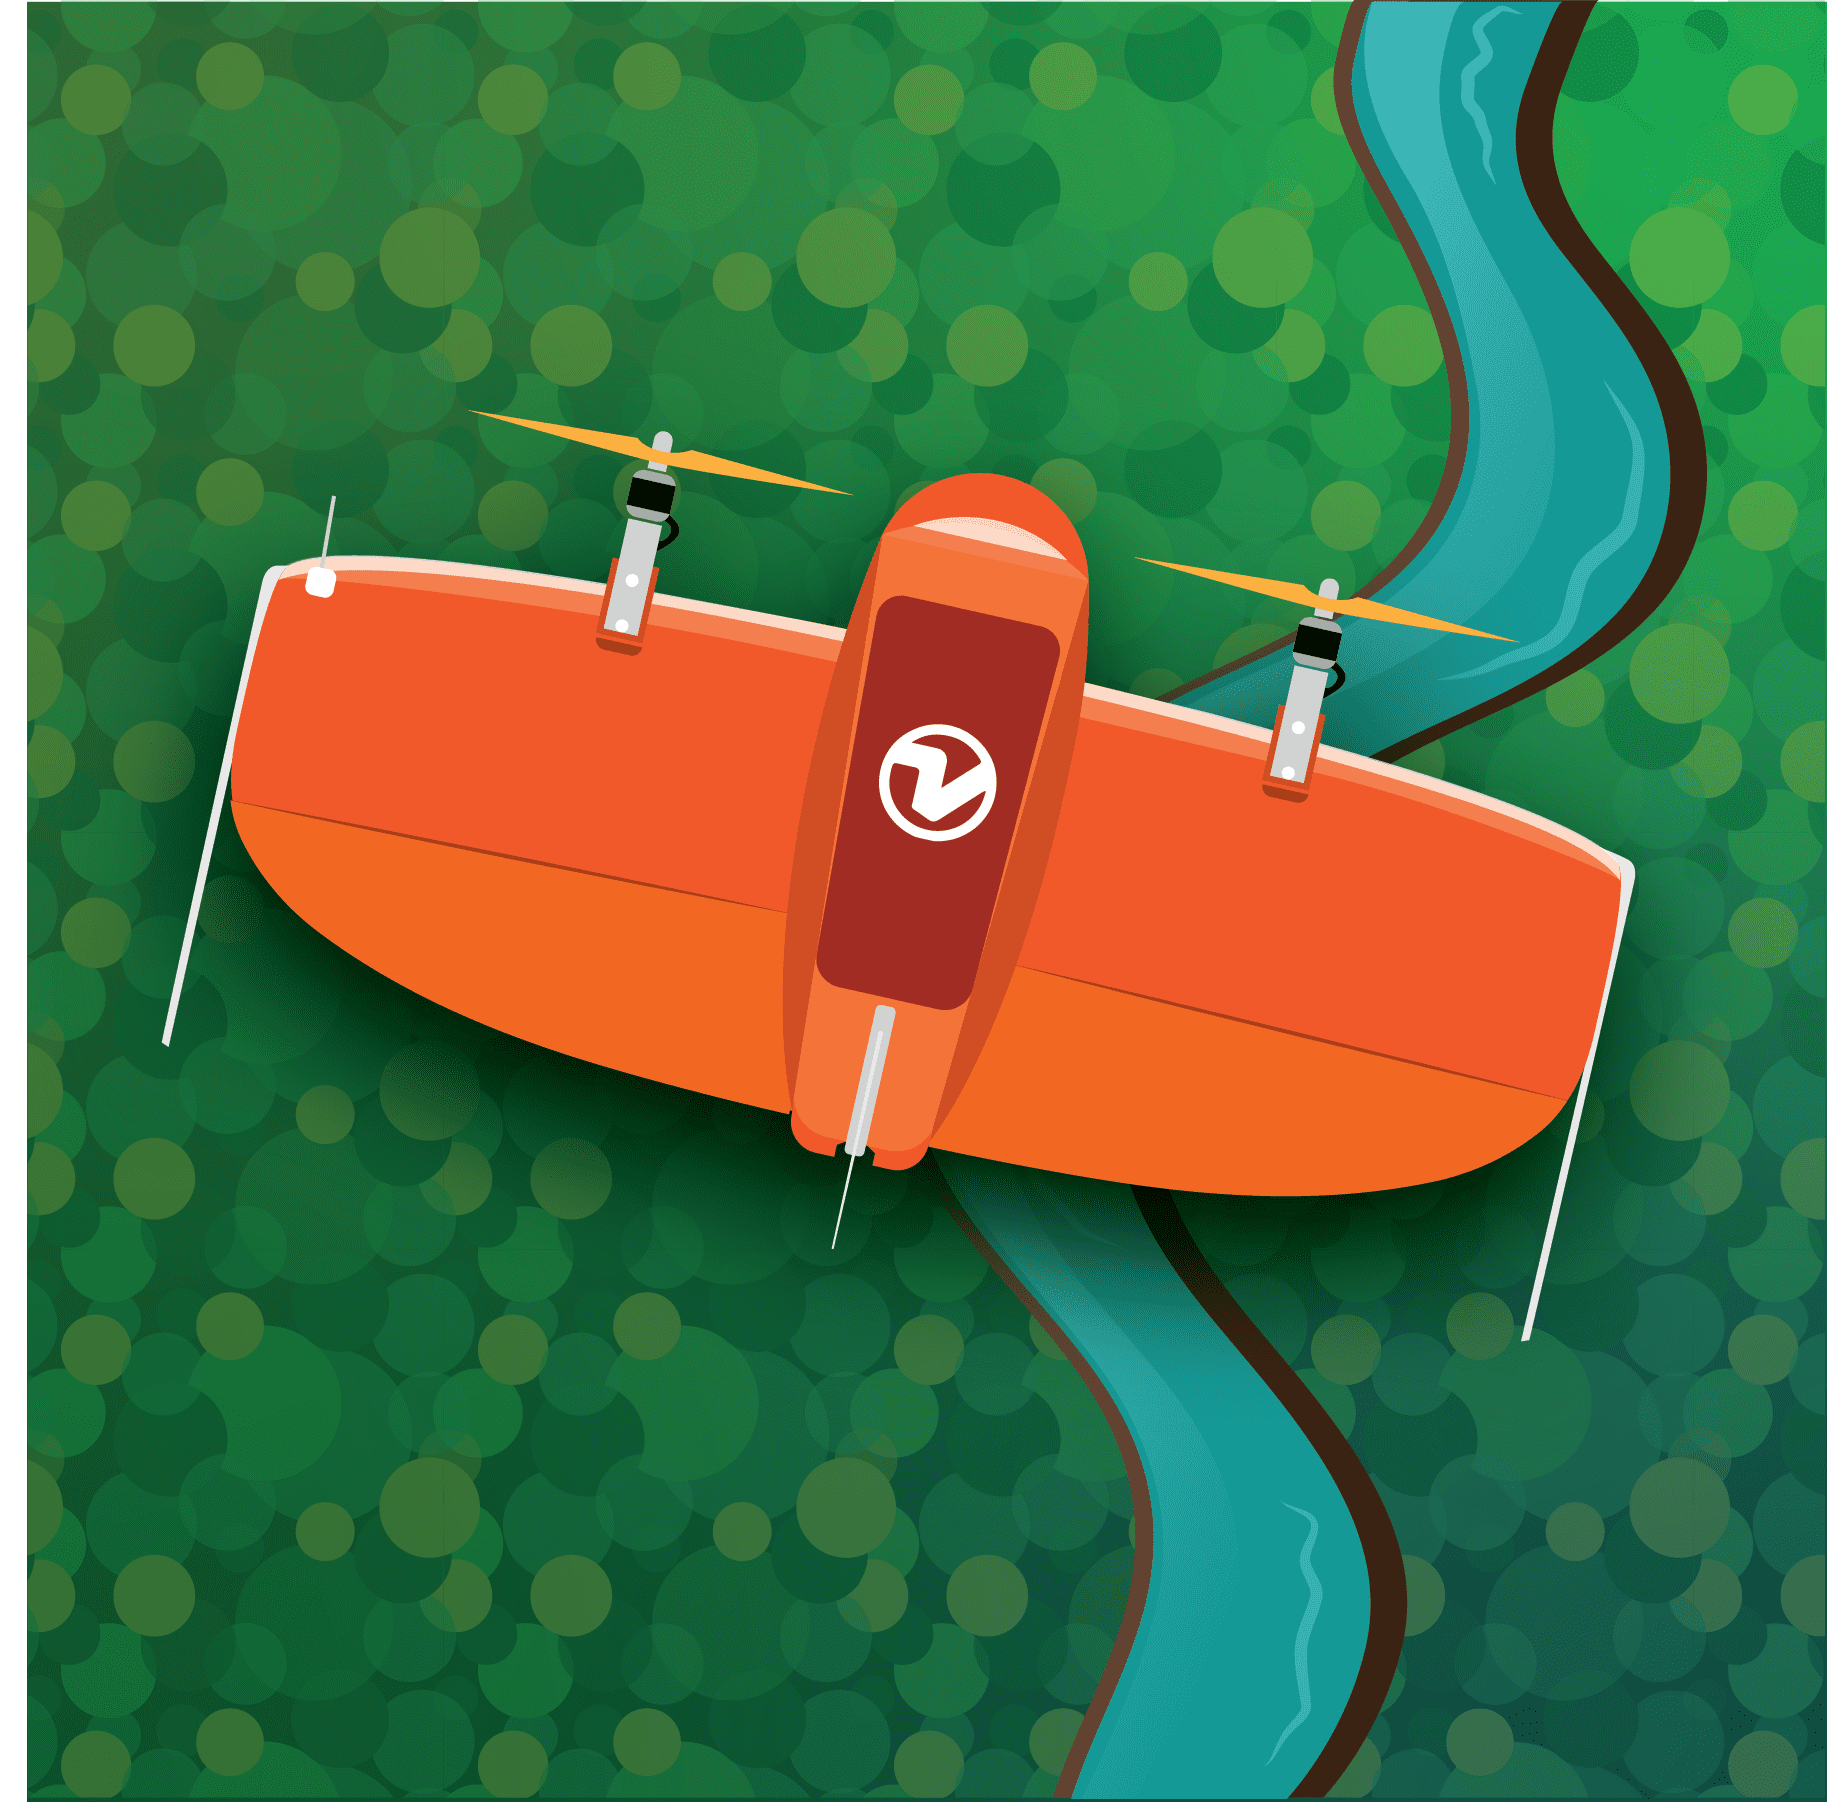 An illustration of the orange WingtraOne drone flying over an abstract landscape